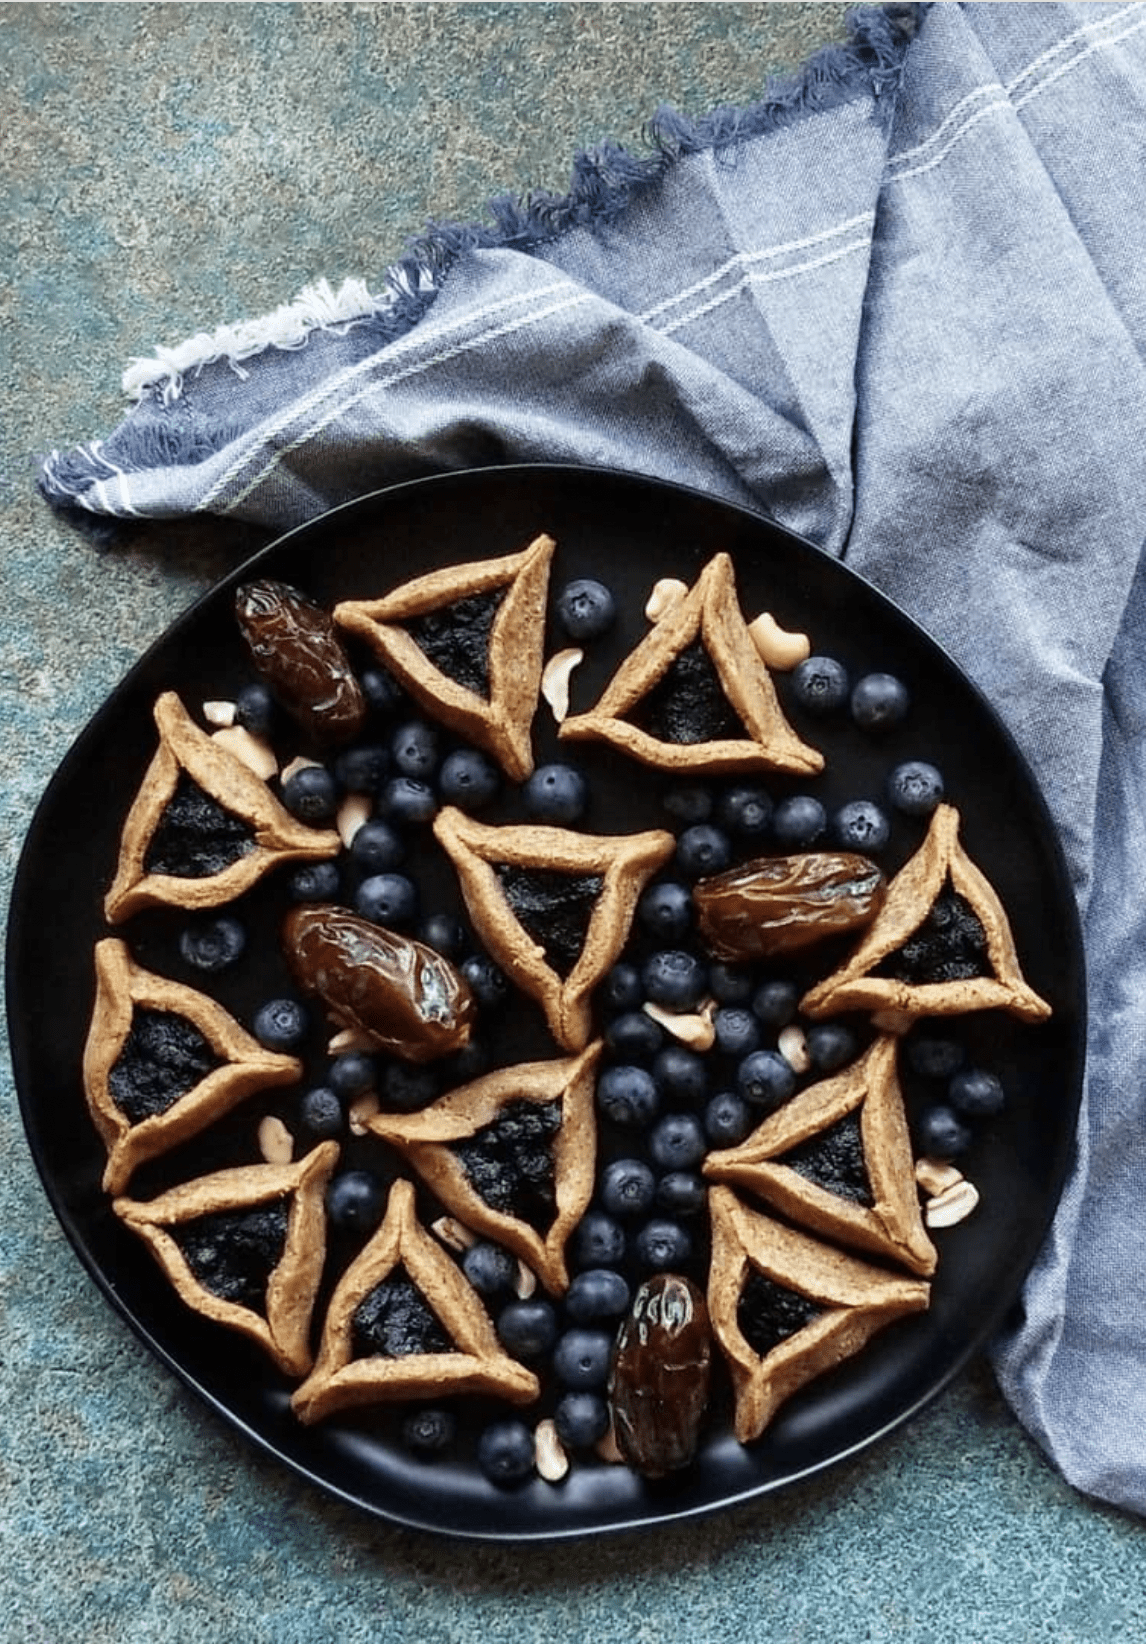 Overhead view of blueberry pie hamantashen cookies with large raisins, raw cashews, and blueberries on a black plate.